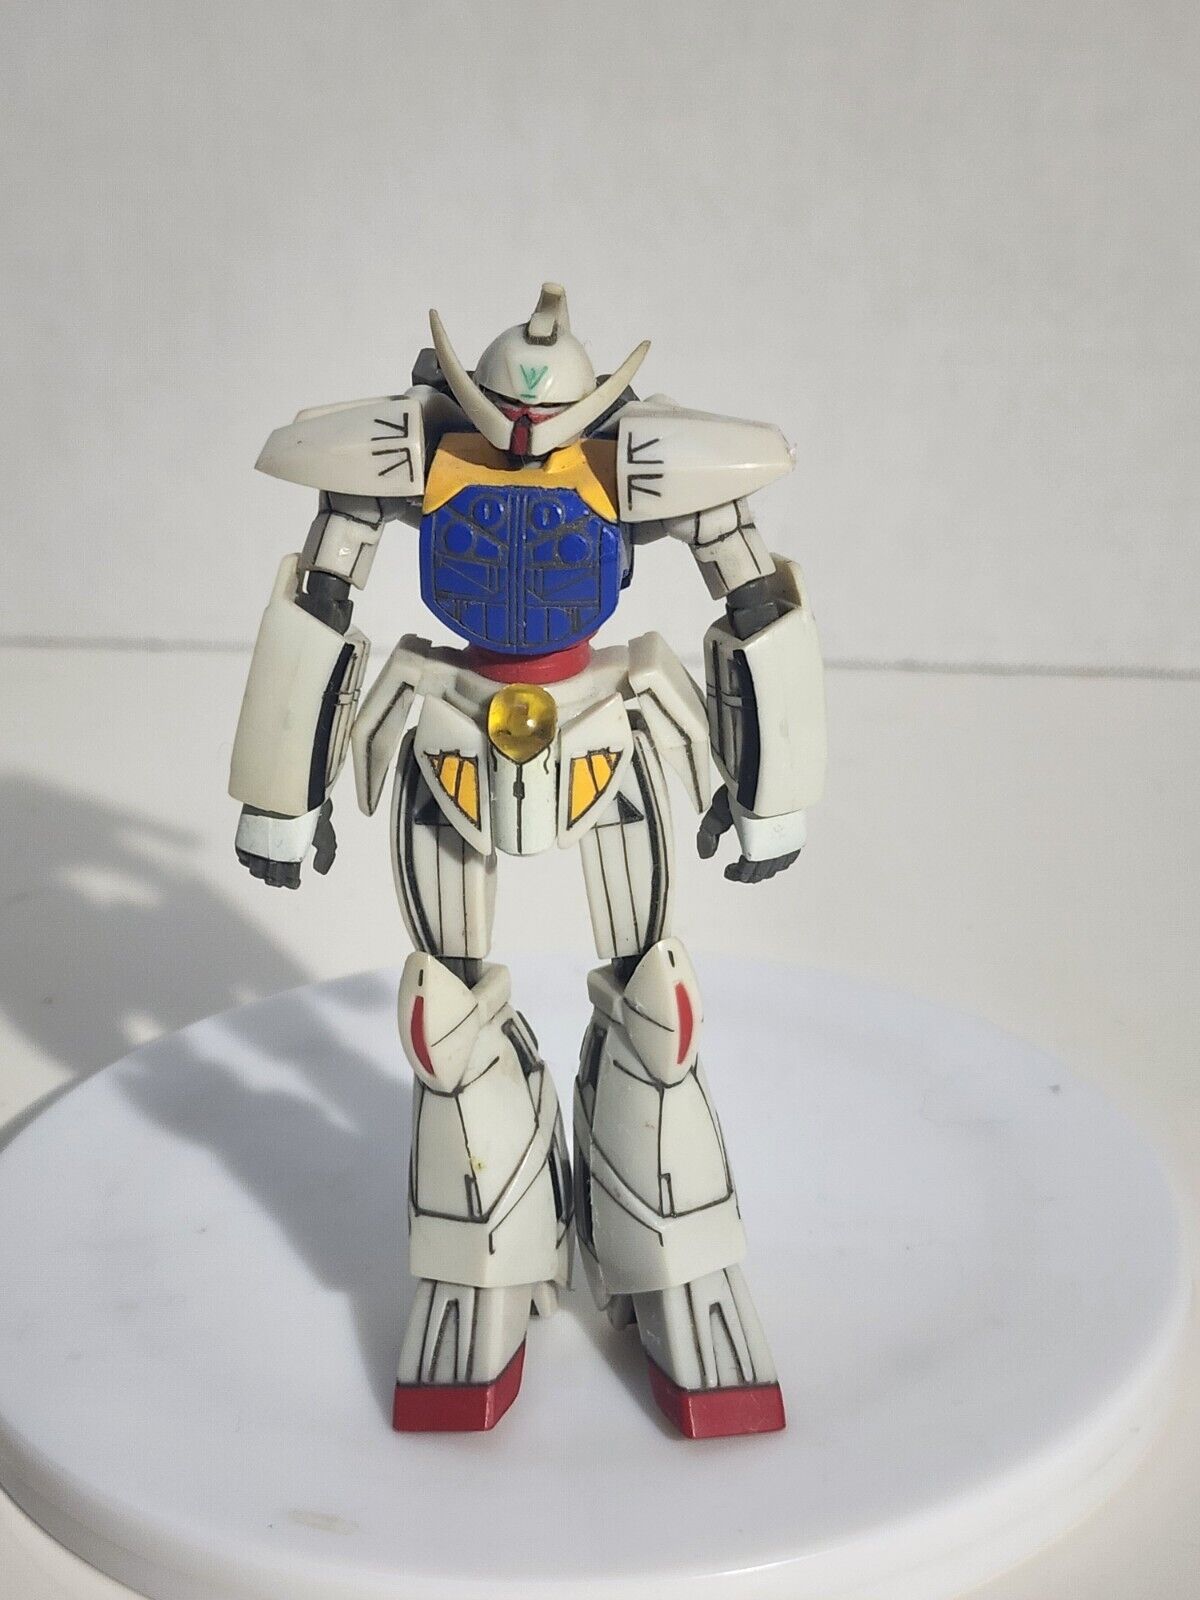 RARE Bandai MS IN ACTION Gundam Turn A Gundam (japan import) Collectable Toy